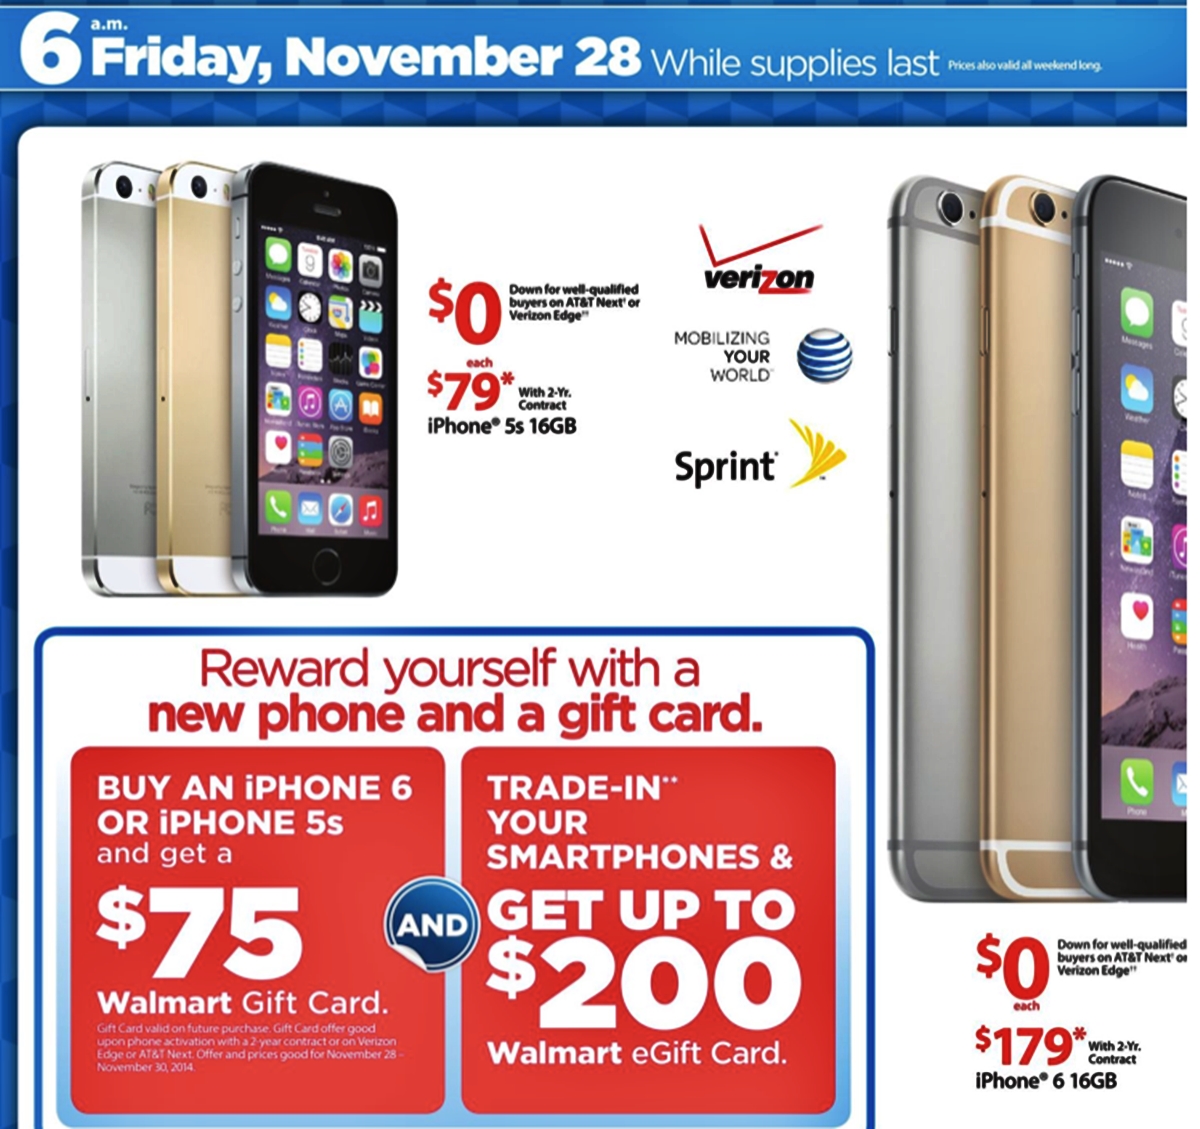 walmart-black-friday-deals-include-iphone-6-for-104